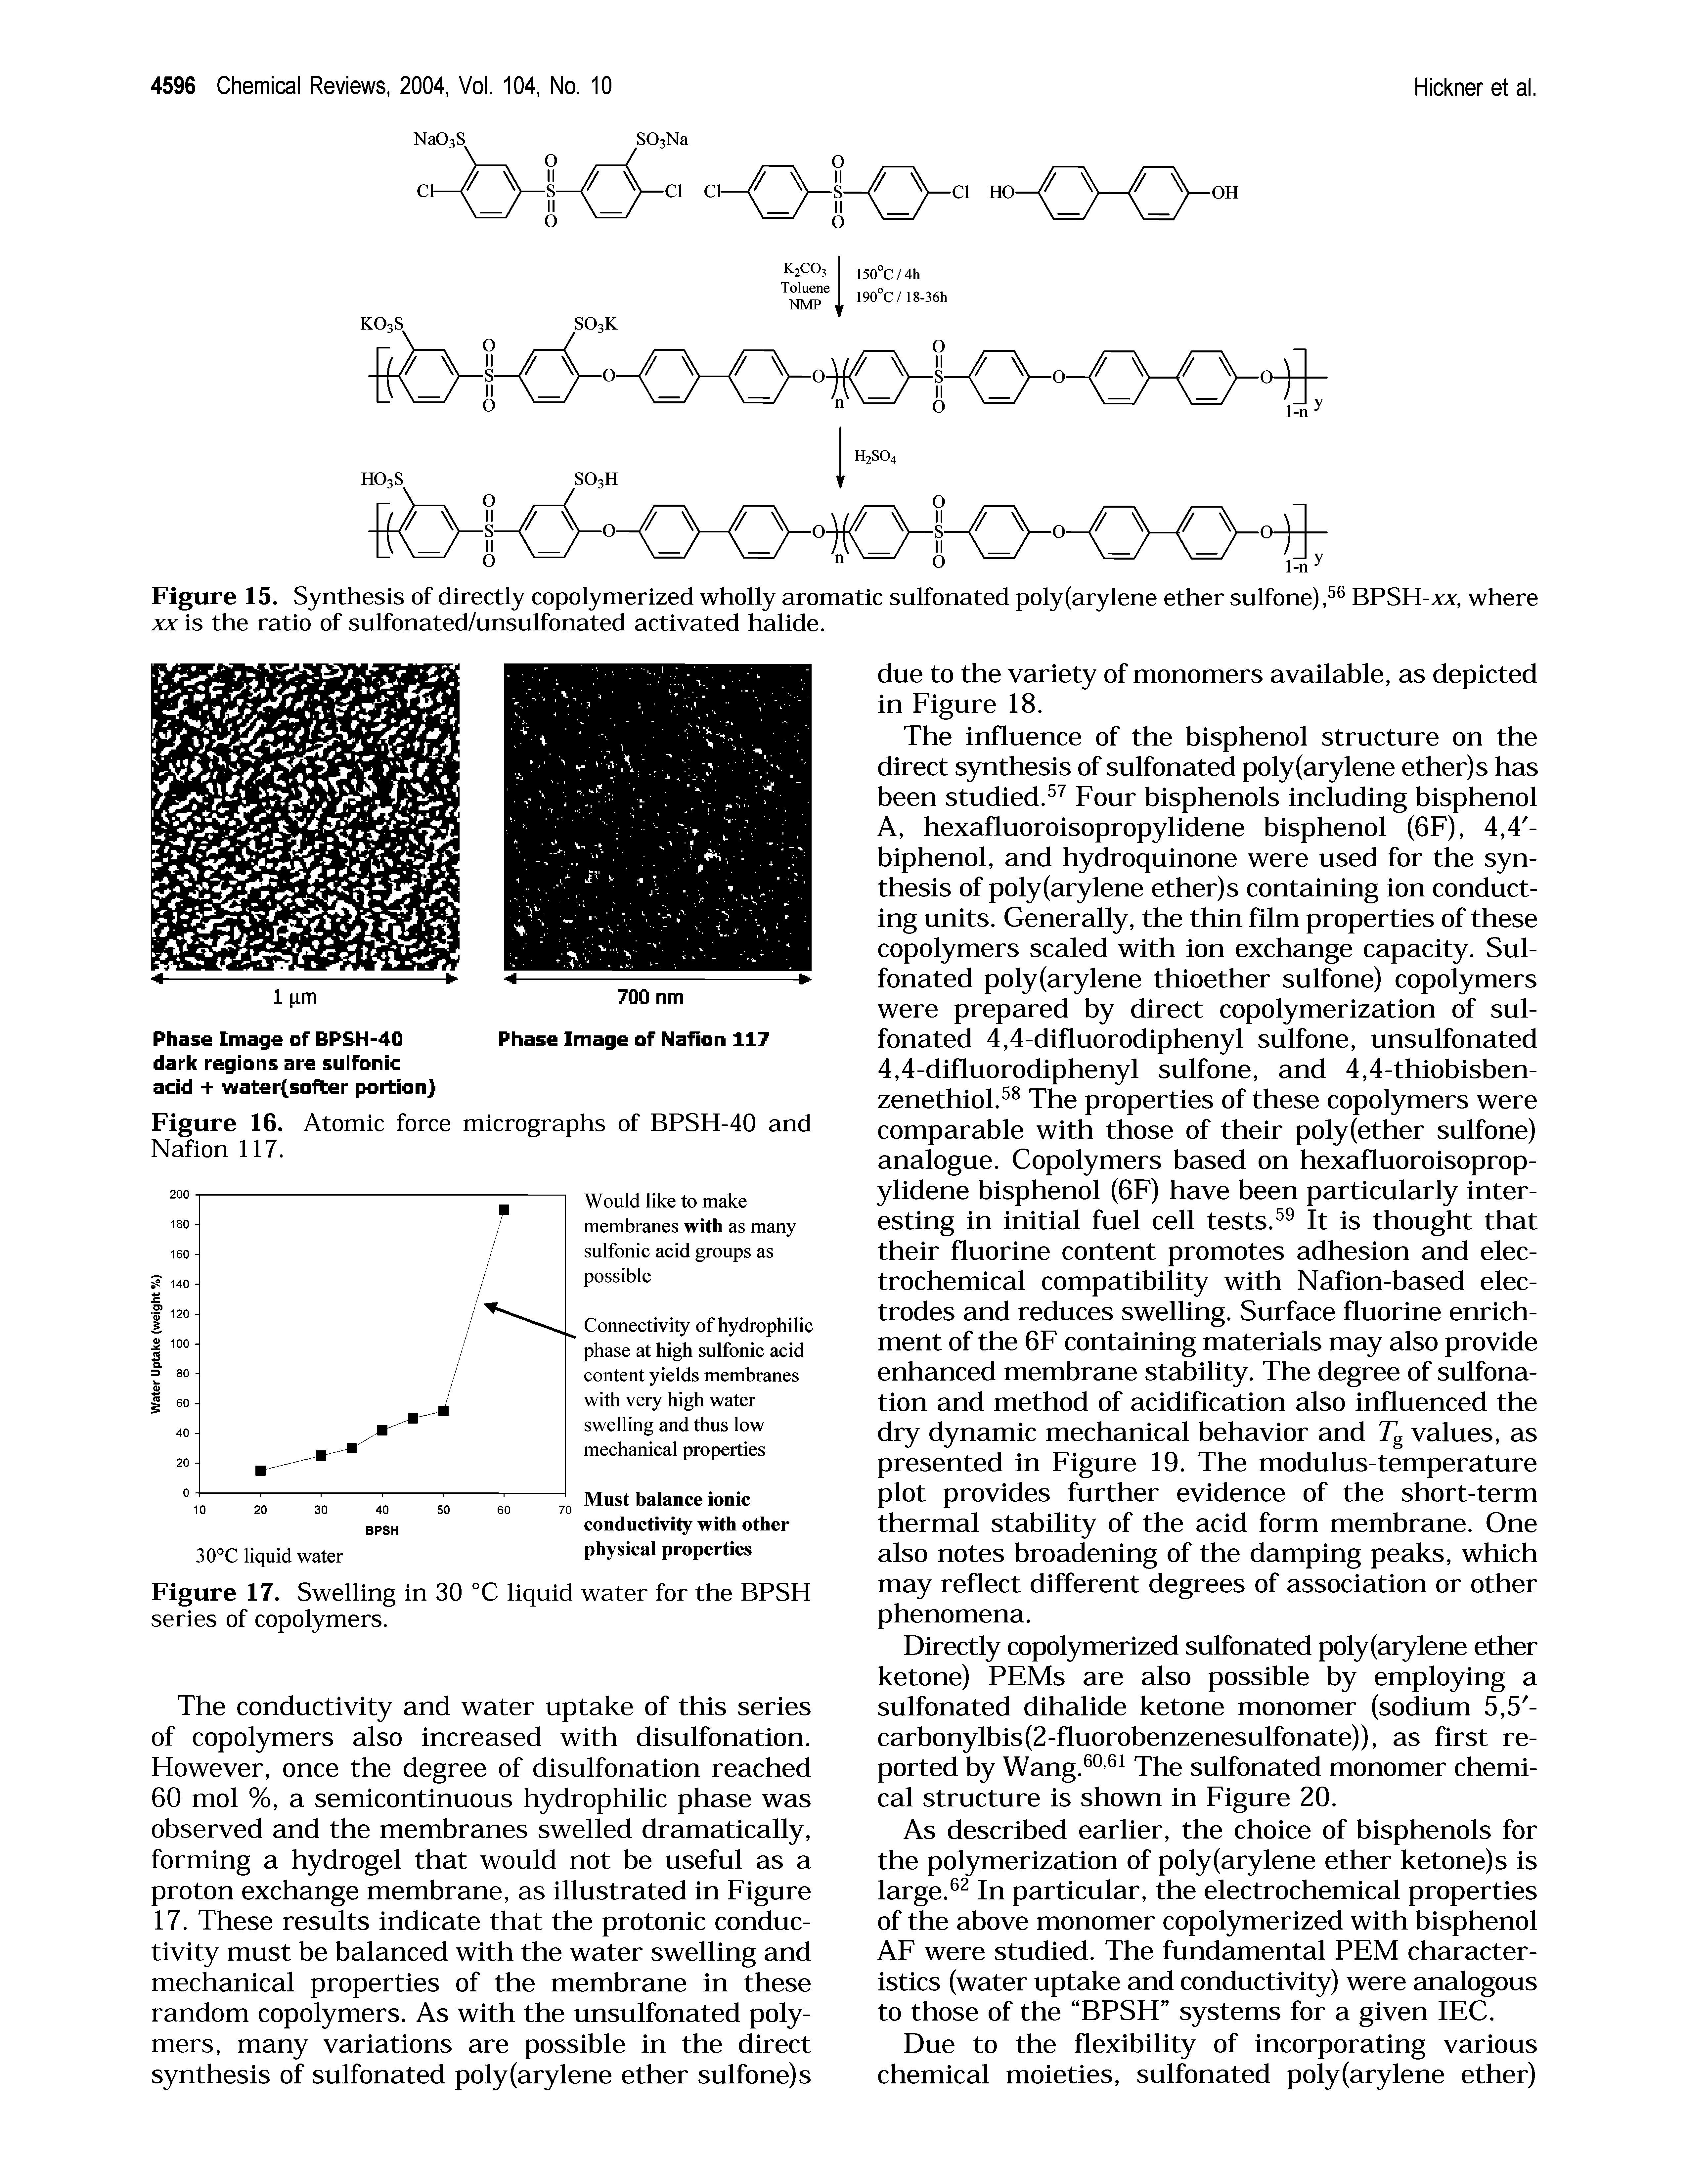 Figure 16. Atomic force micrographs of BPSH-40 and Nafion 117.